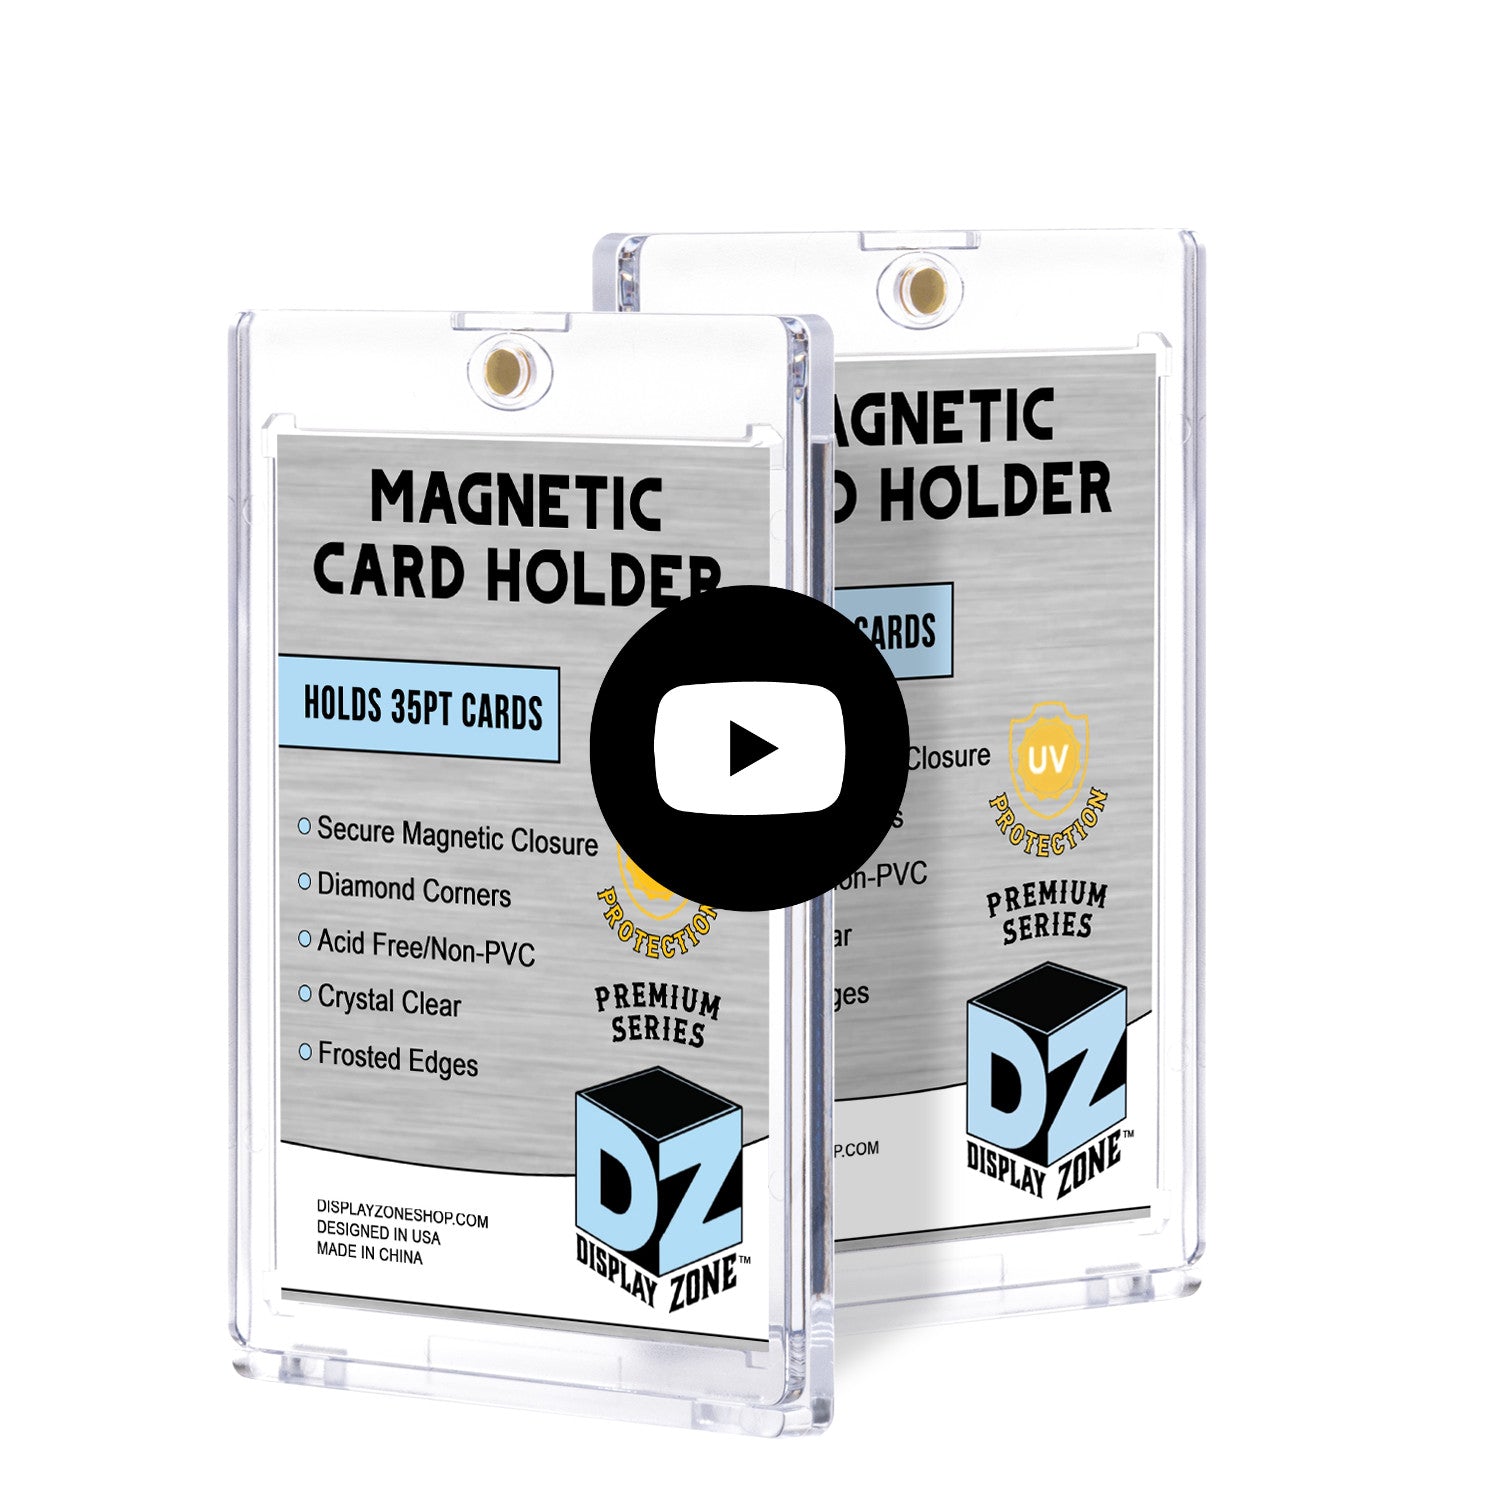 display zone one touch holder magnetic trading card holder 35pt card holder trading card protection